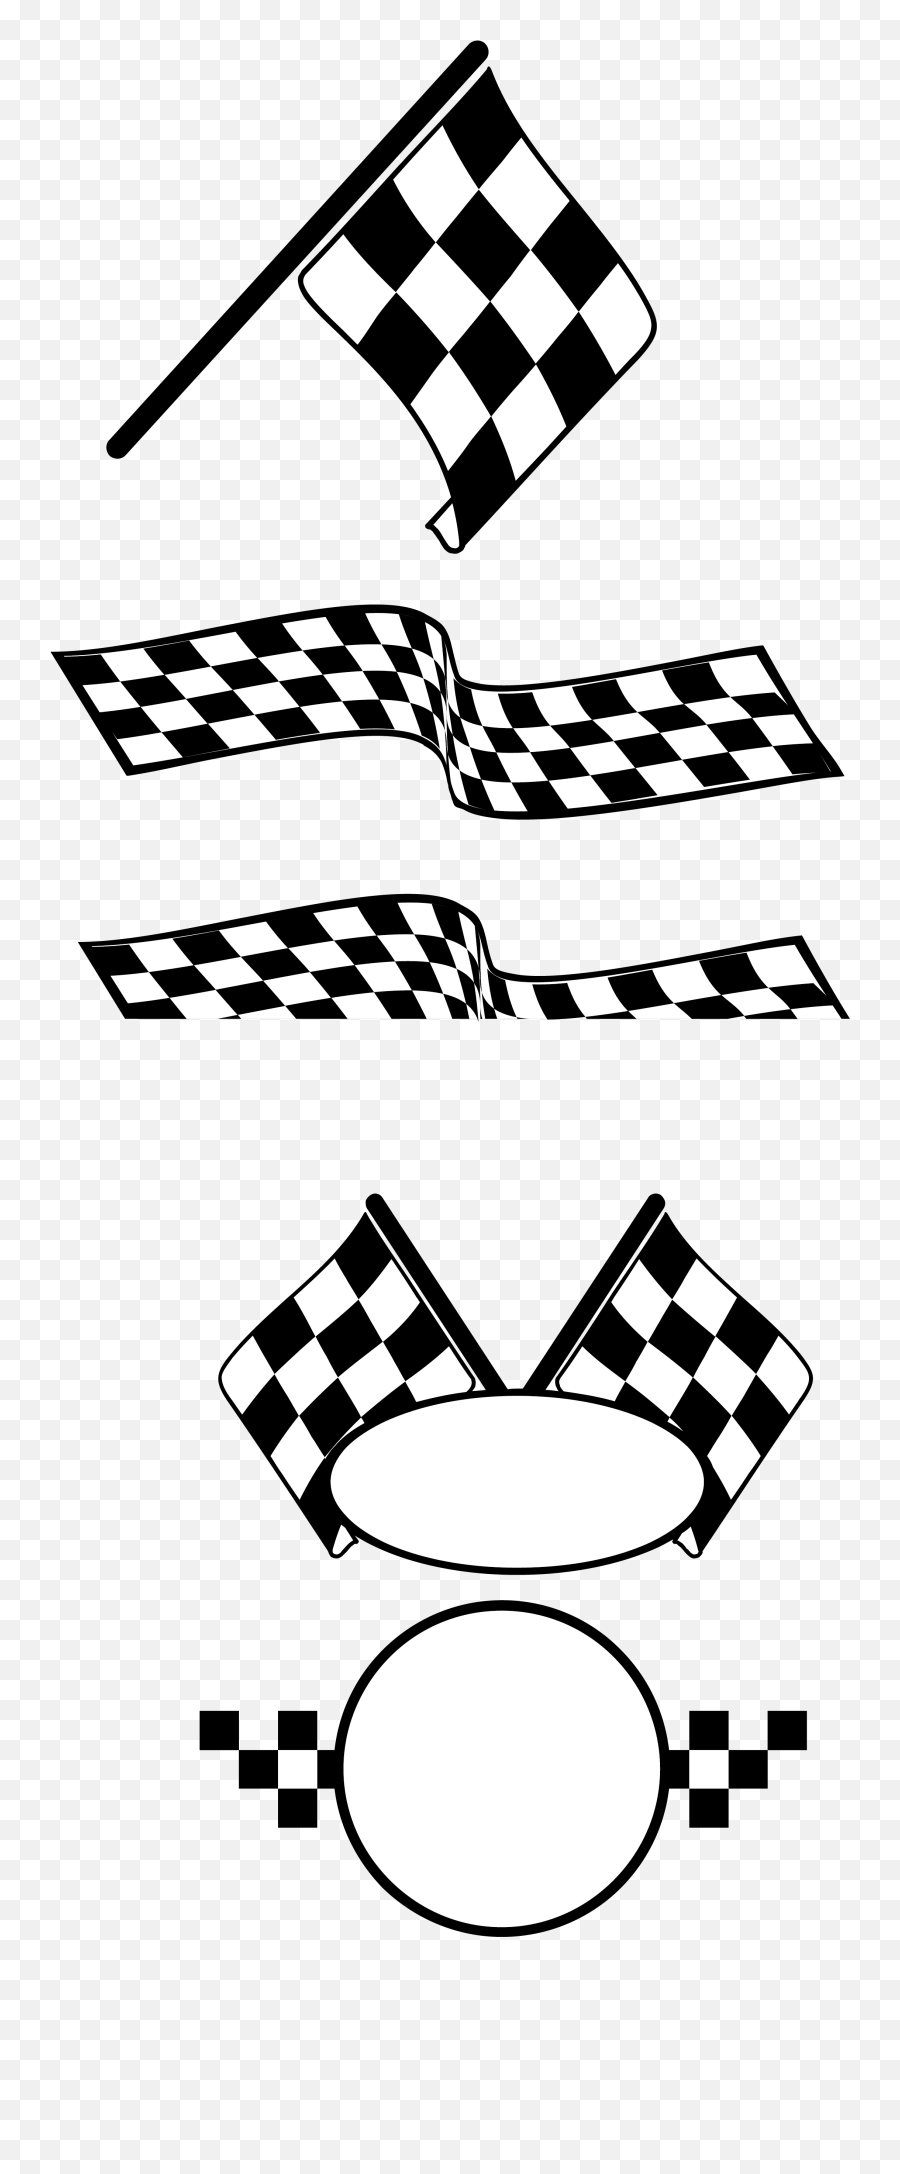 Download Auto Racing Flags - Racing Flags Png,Racing Flags Png